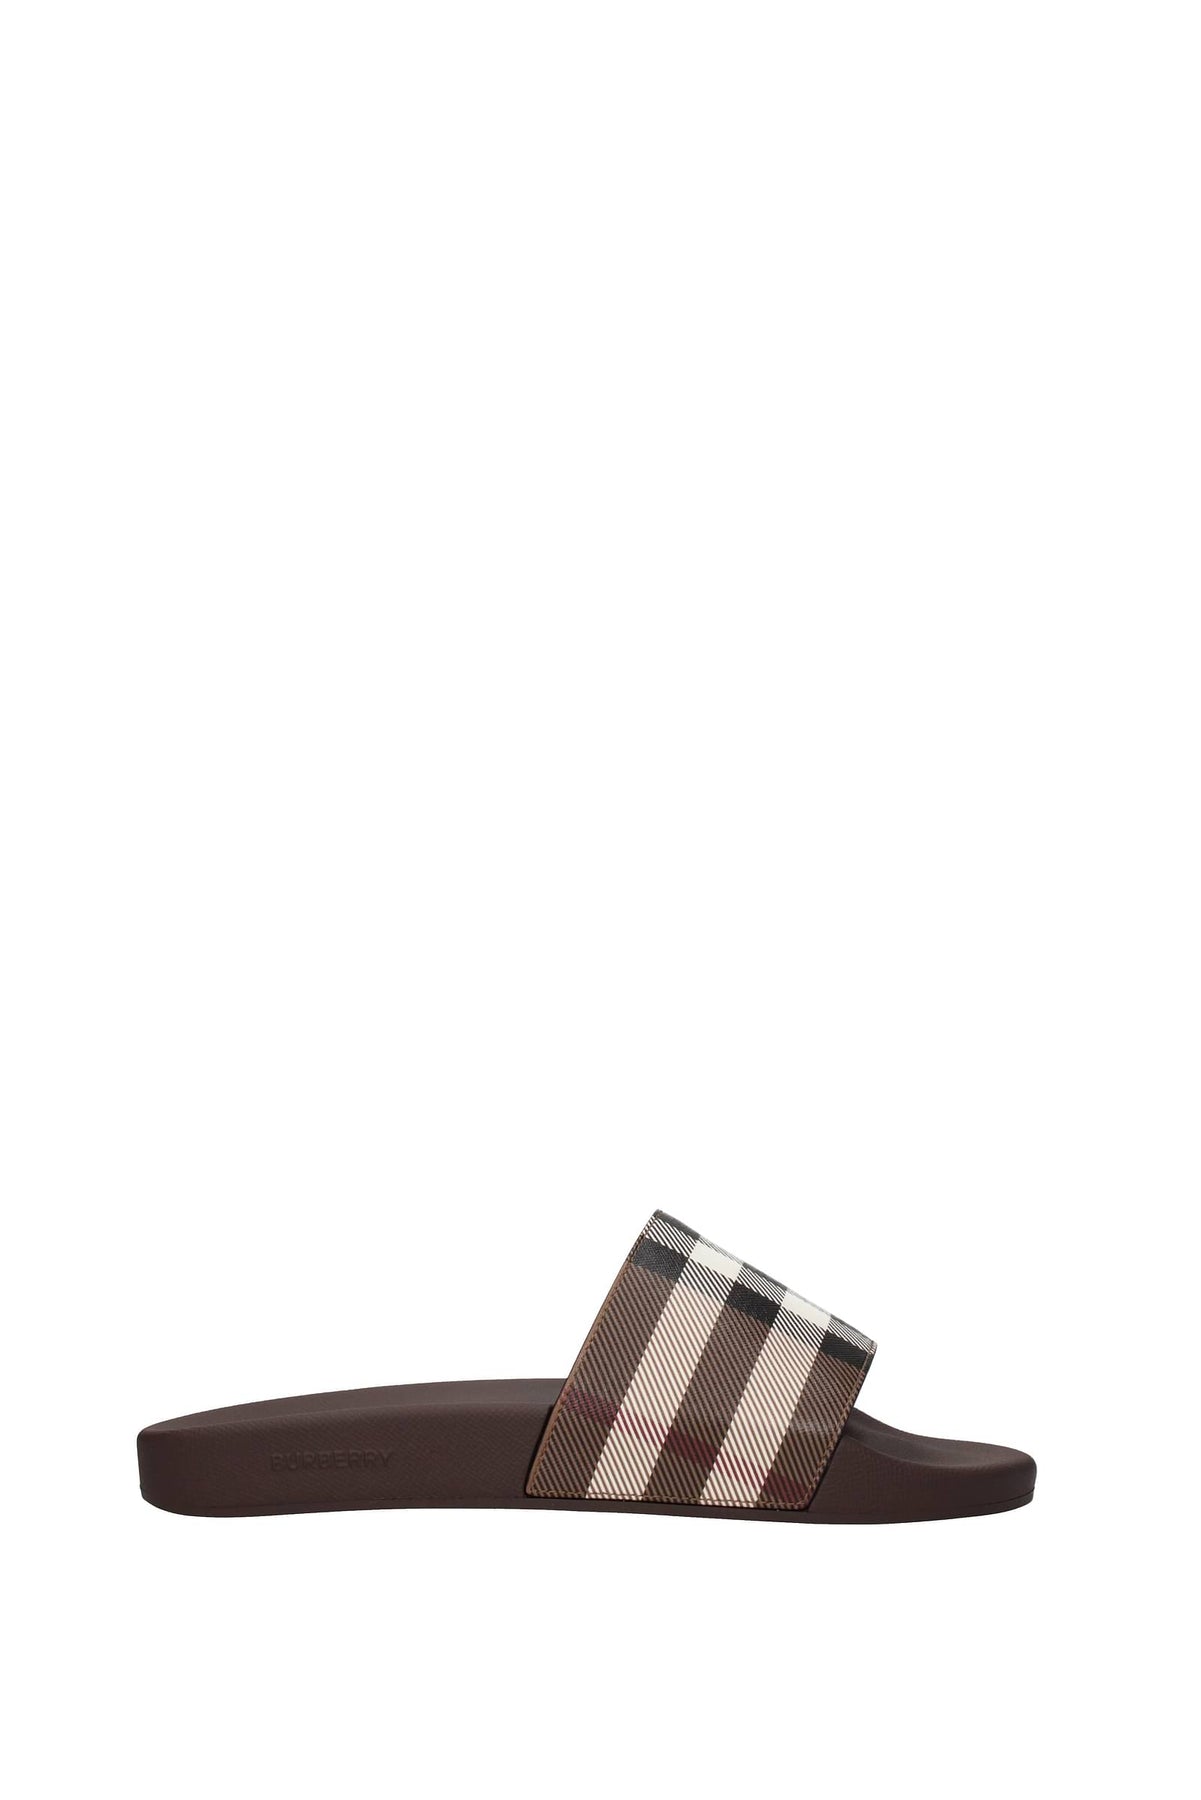 BURBERRY SLIPPERS AND CLOGS RUBBER BROWN BIRCH